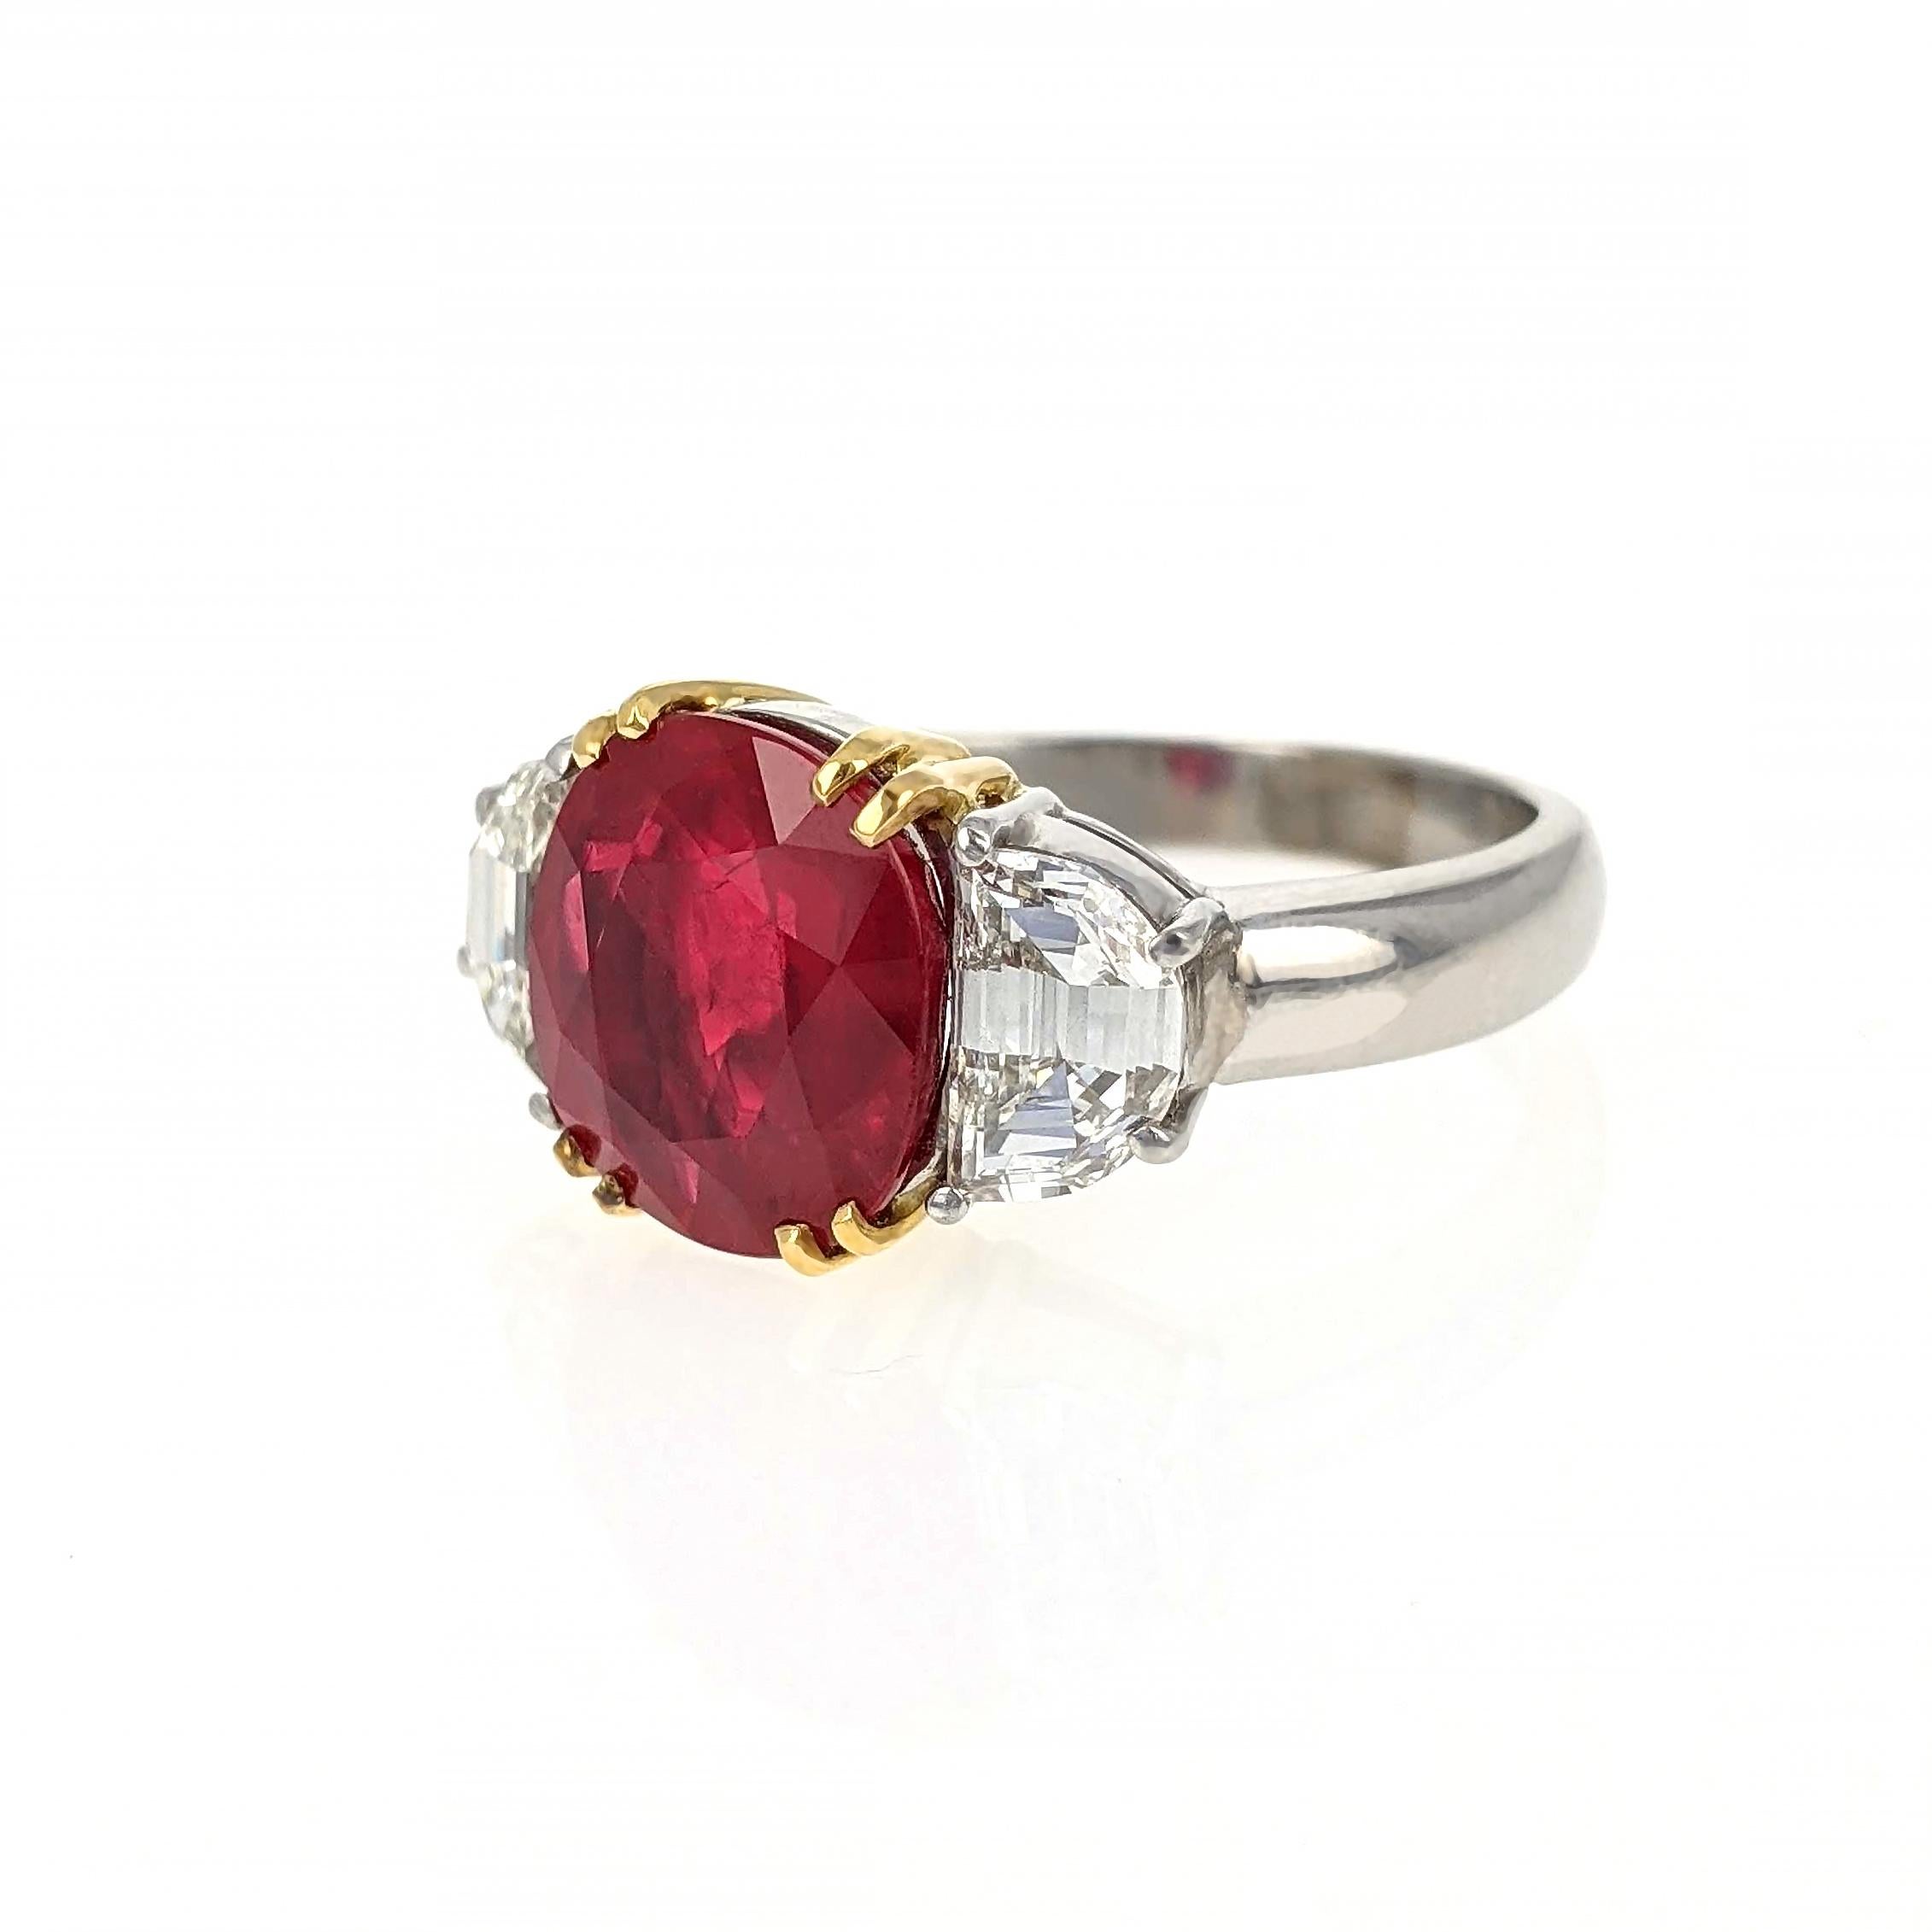 4.07 Carat Burma Ruby Diamond Platinum and Gold Ring In Good Condition For Sale In New York, NY